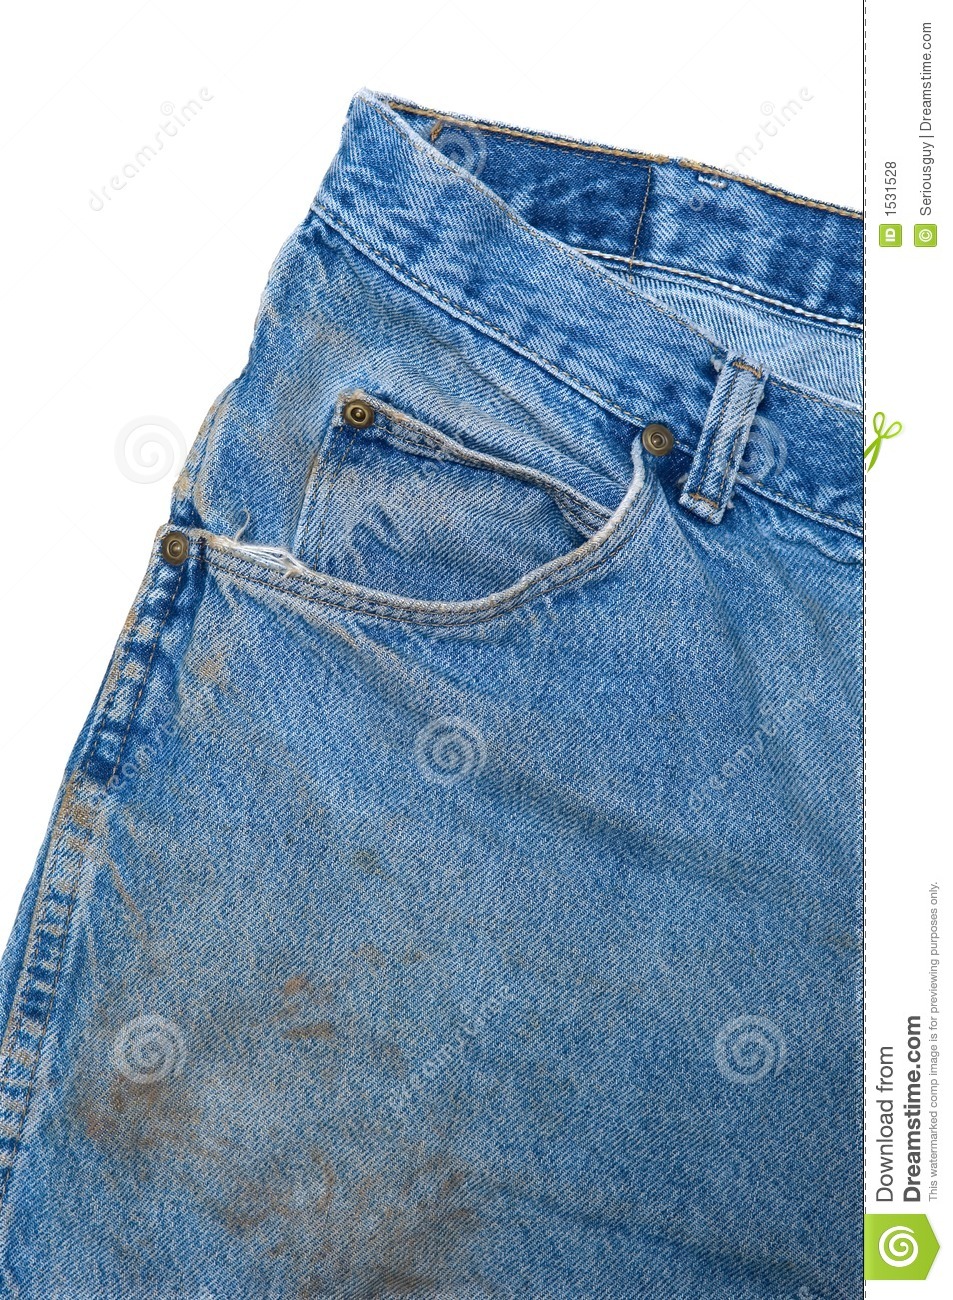 Pocket Detail Of Dirty Blue Jeans Royalty Free Stock Photos   Image    